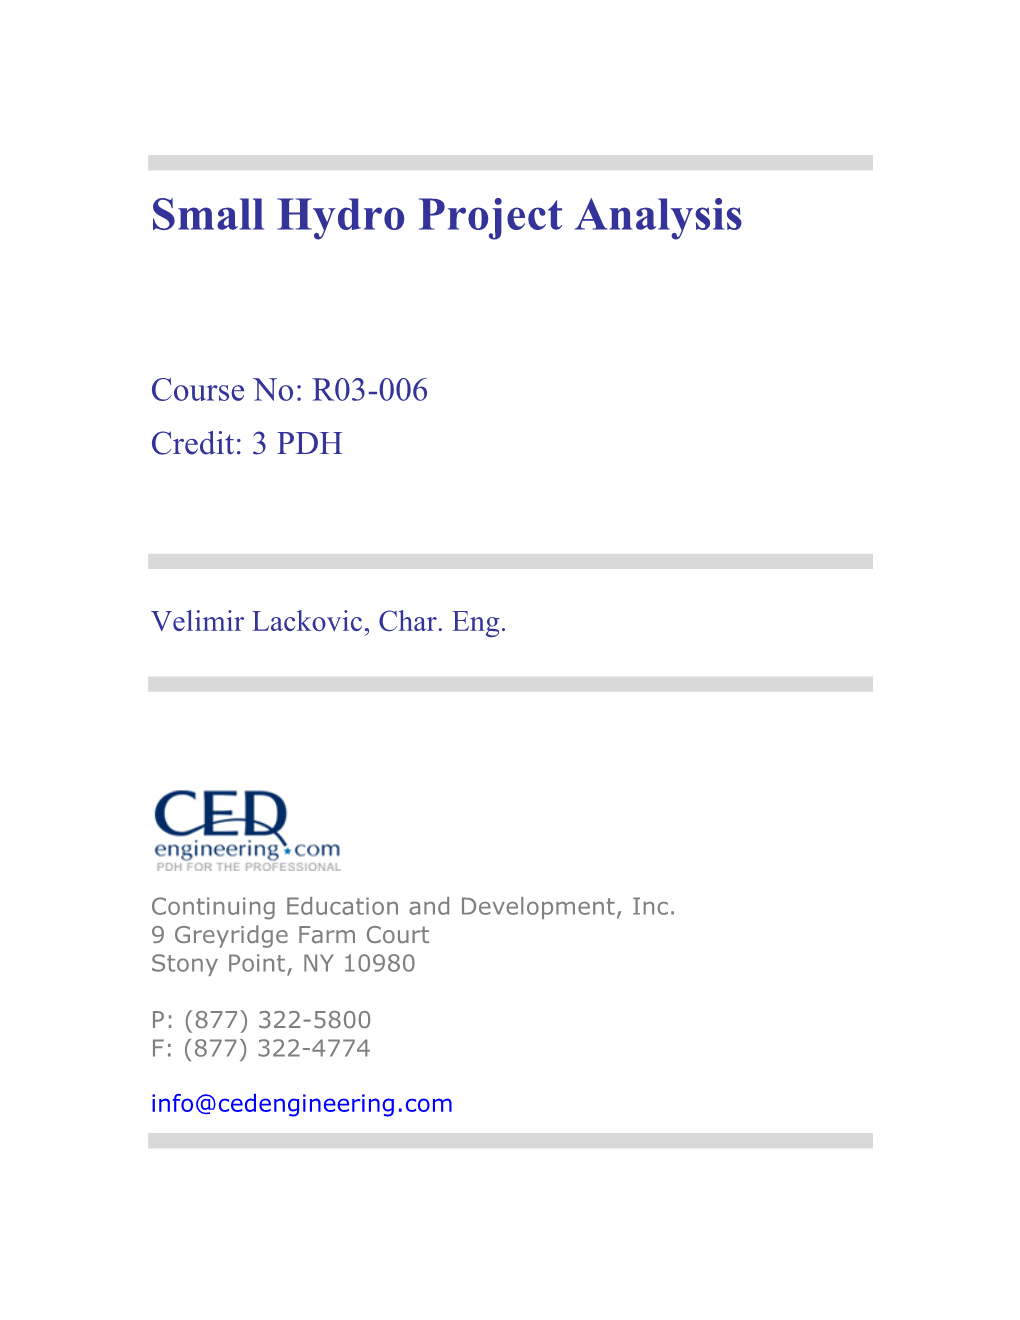 Small Hydro Project Analysis